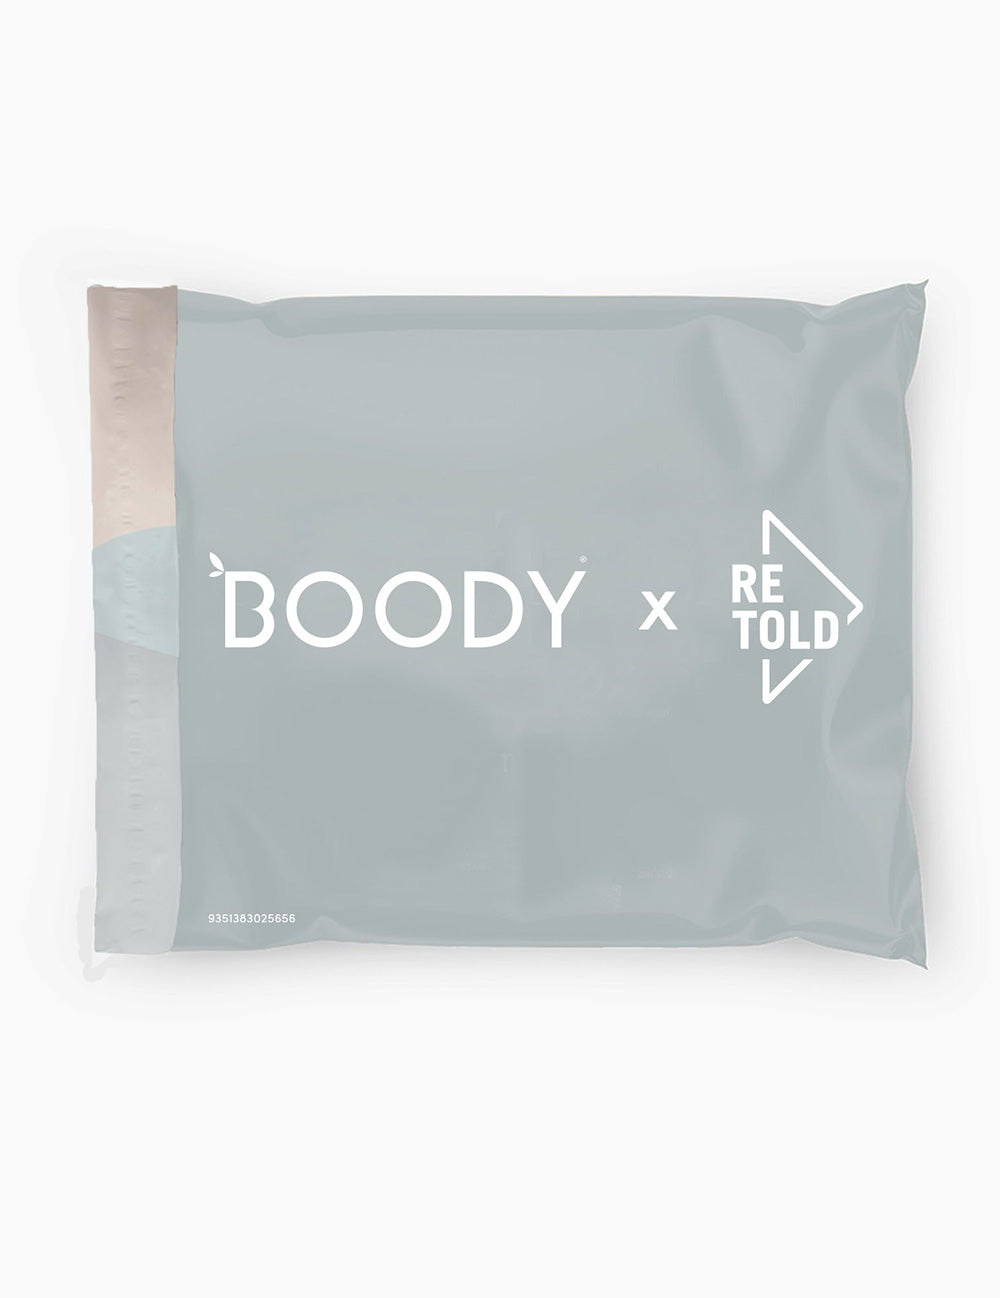 Boody x ReTold Second Life Clothes Recycling Bag Back